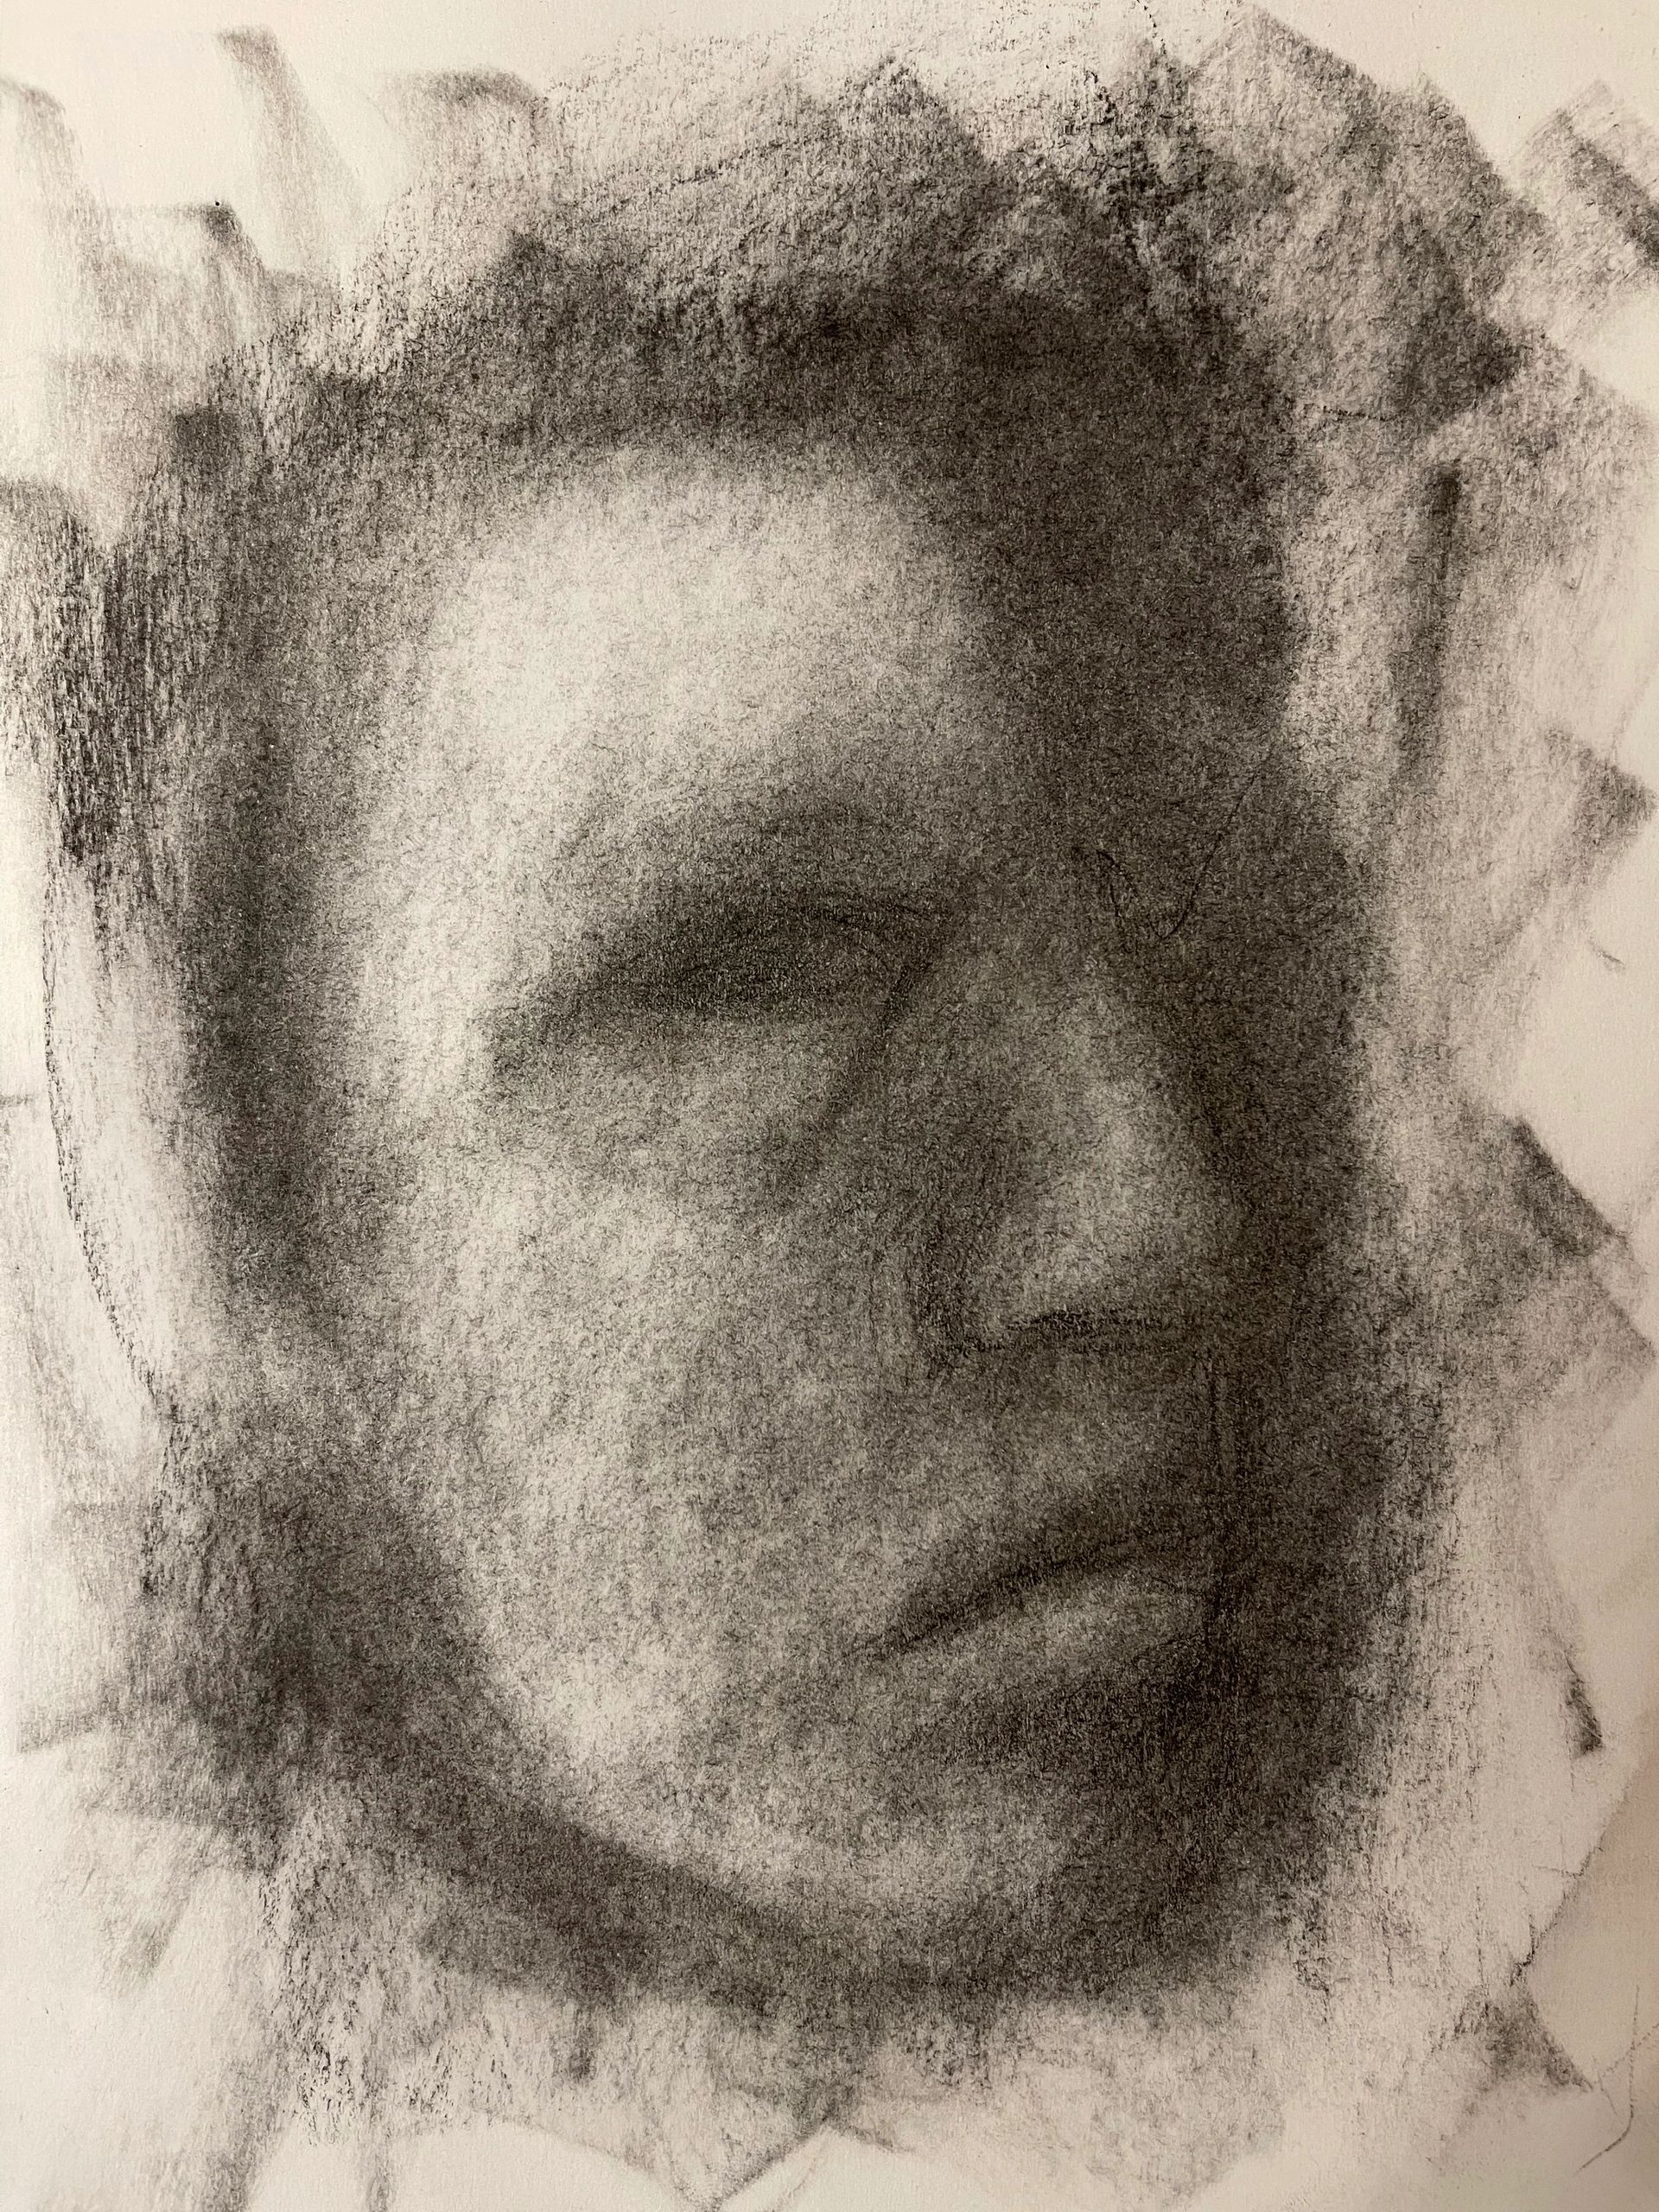 “ SELF PORTRAIT ” 2022
Charcoal studies on paper 
9” X 12”

NOT FOR SALE